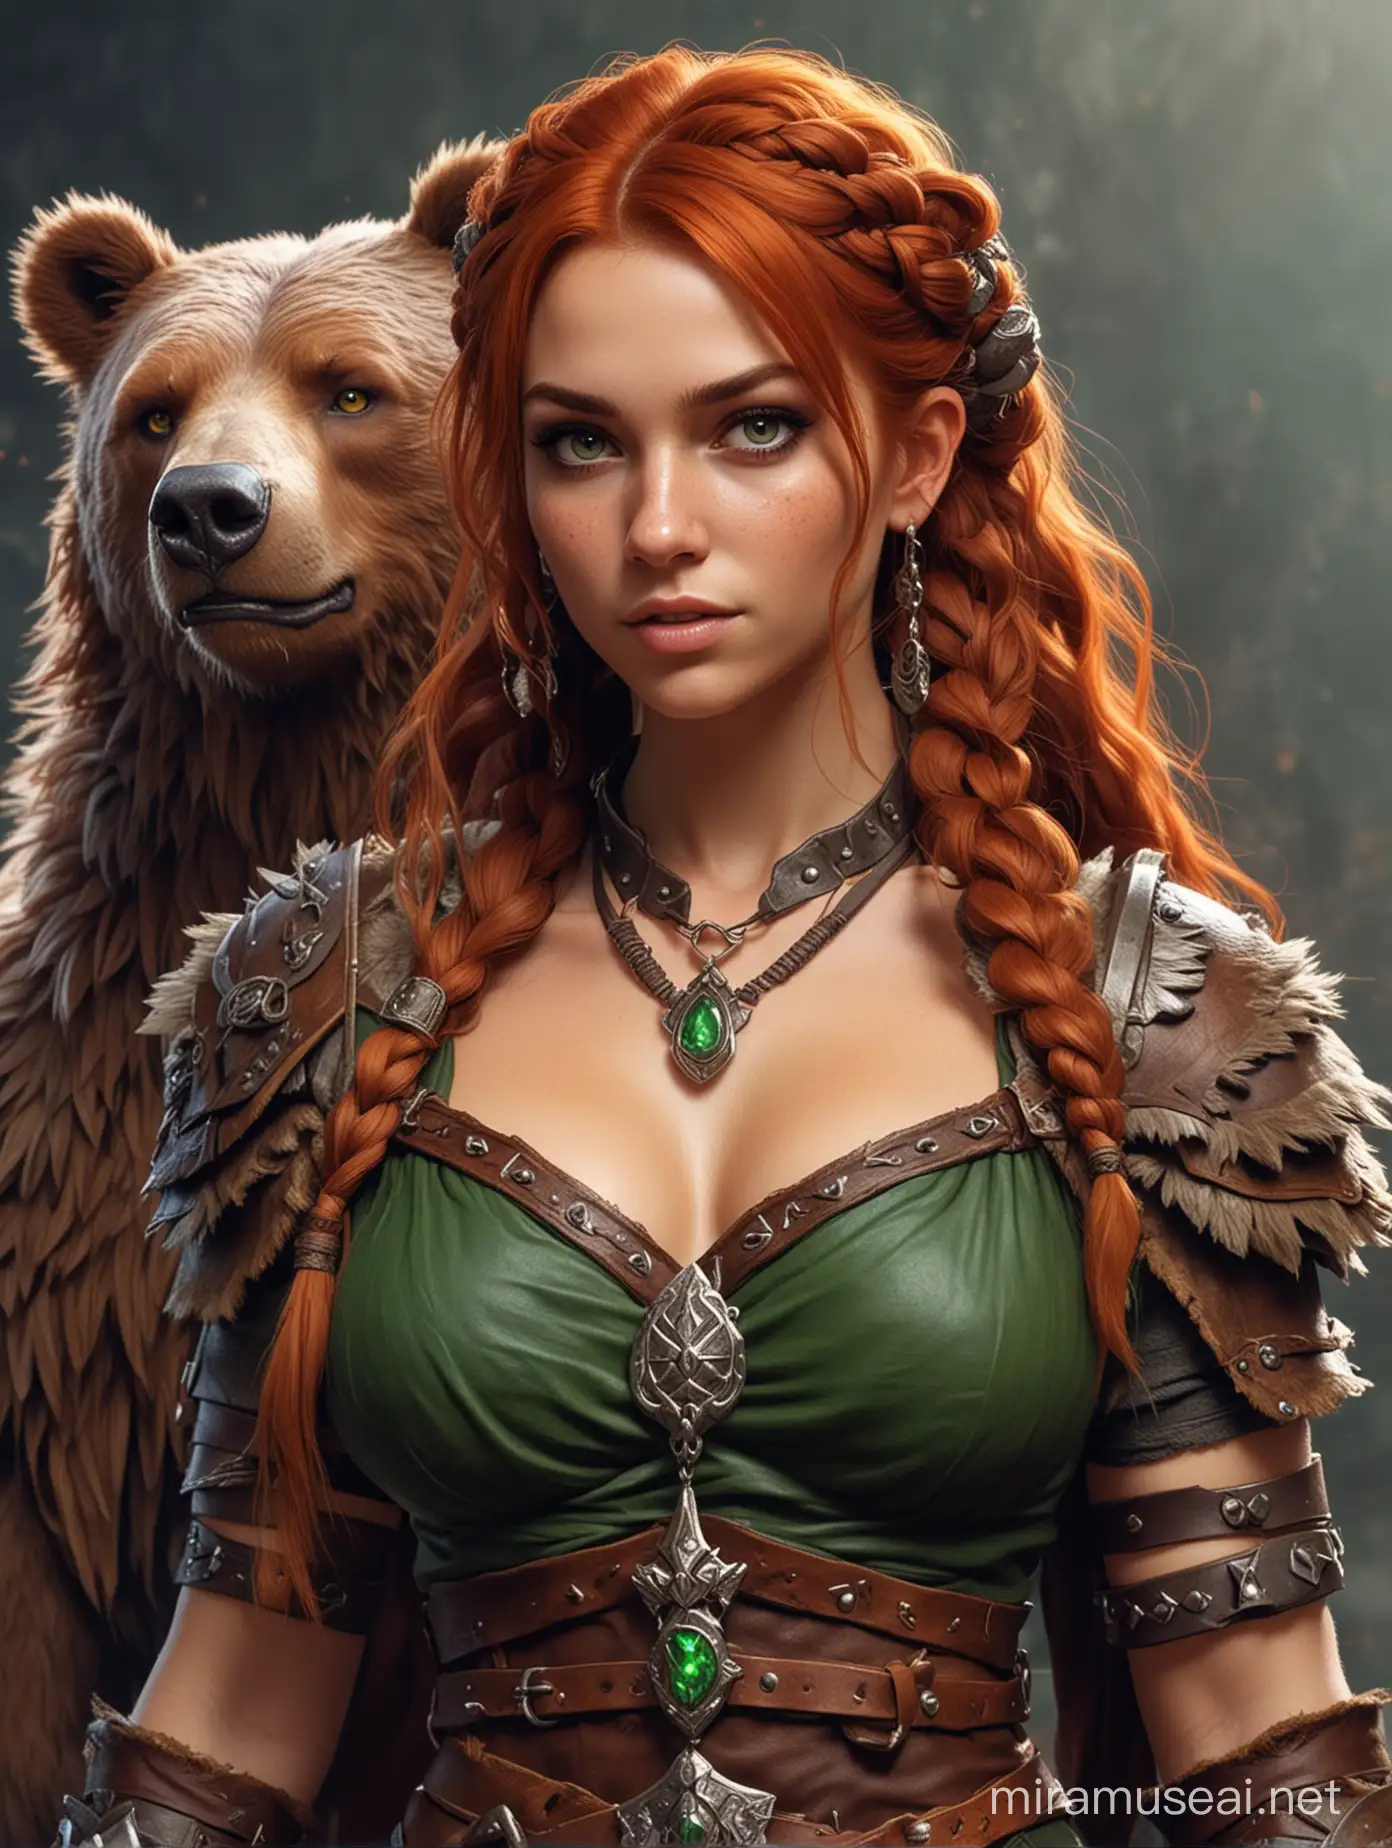 I want you to create the image of a Dungeons and Dragons character, a human woman. She is a barbarian, redhead, with braided hair and green eyes. Dresses in animal skins with bear decorations